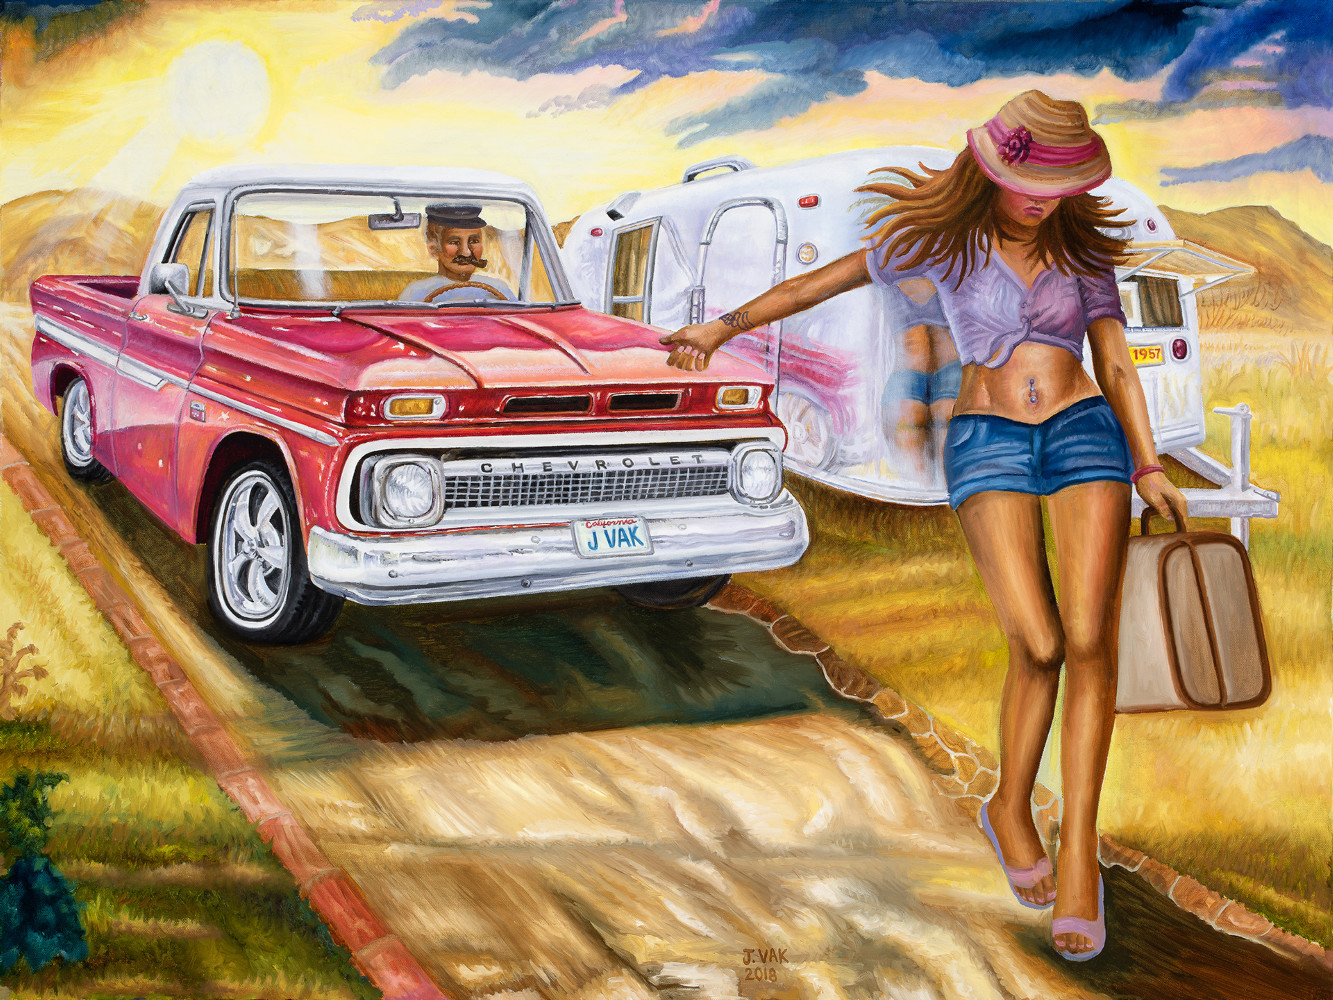 1966 Chevy Pickup with Hitchhiker
      30 X 40 Oil on Canvas
                 $2500
                   2018